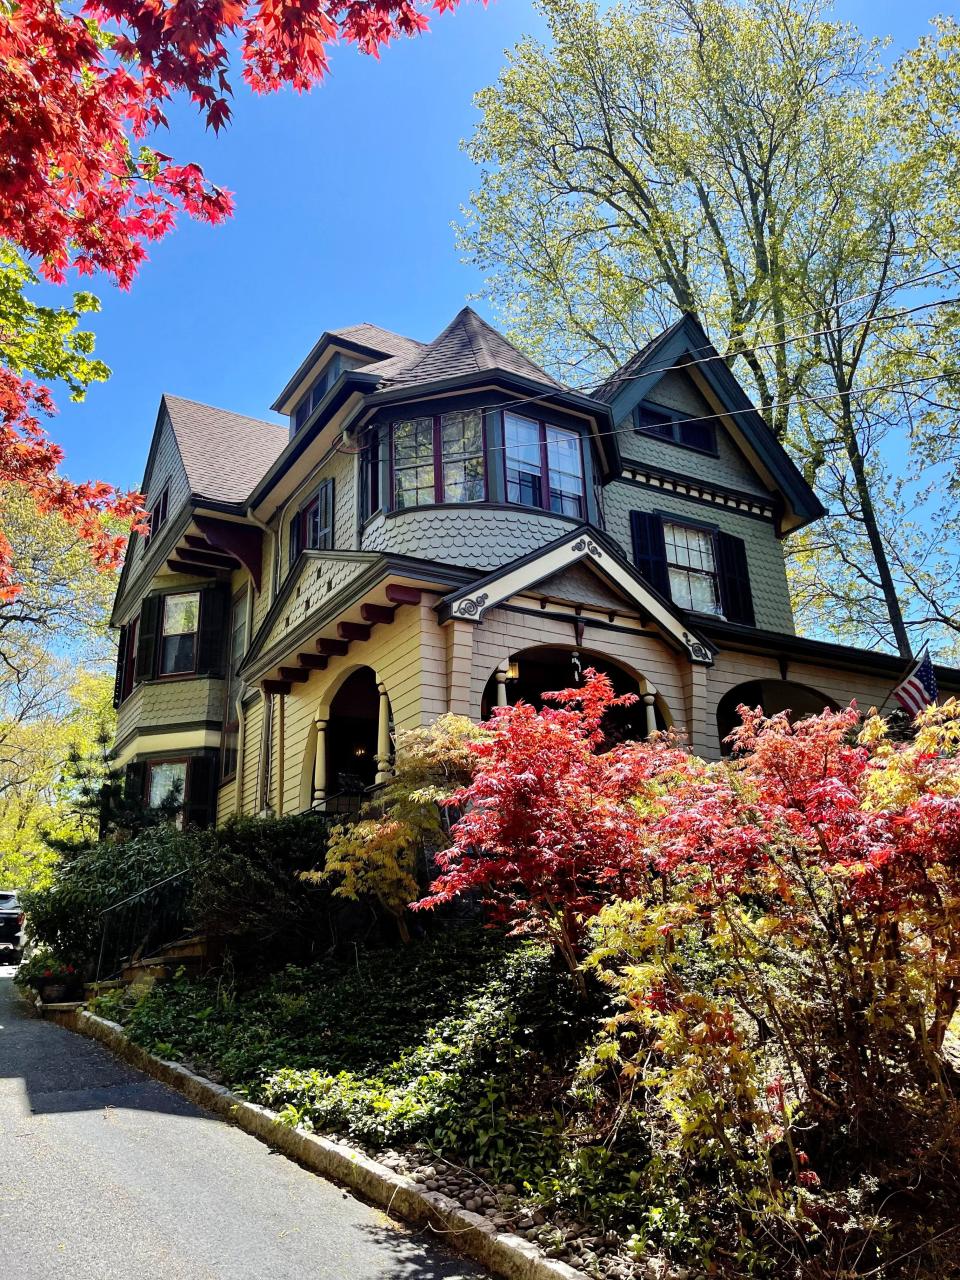 A Queen Anne Victorian home built in 1888 is the former residence of noted publisher and Tenafly's ninth mayor Frederic L. Colver and his wife Lillian. It hit the market in 2022.